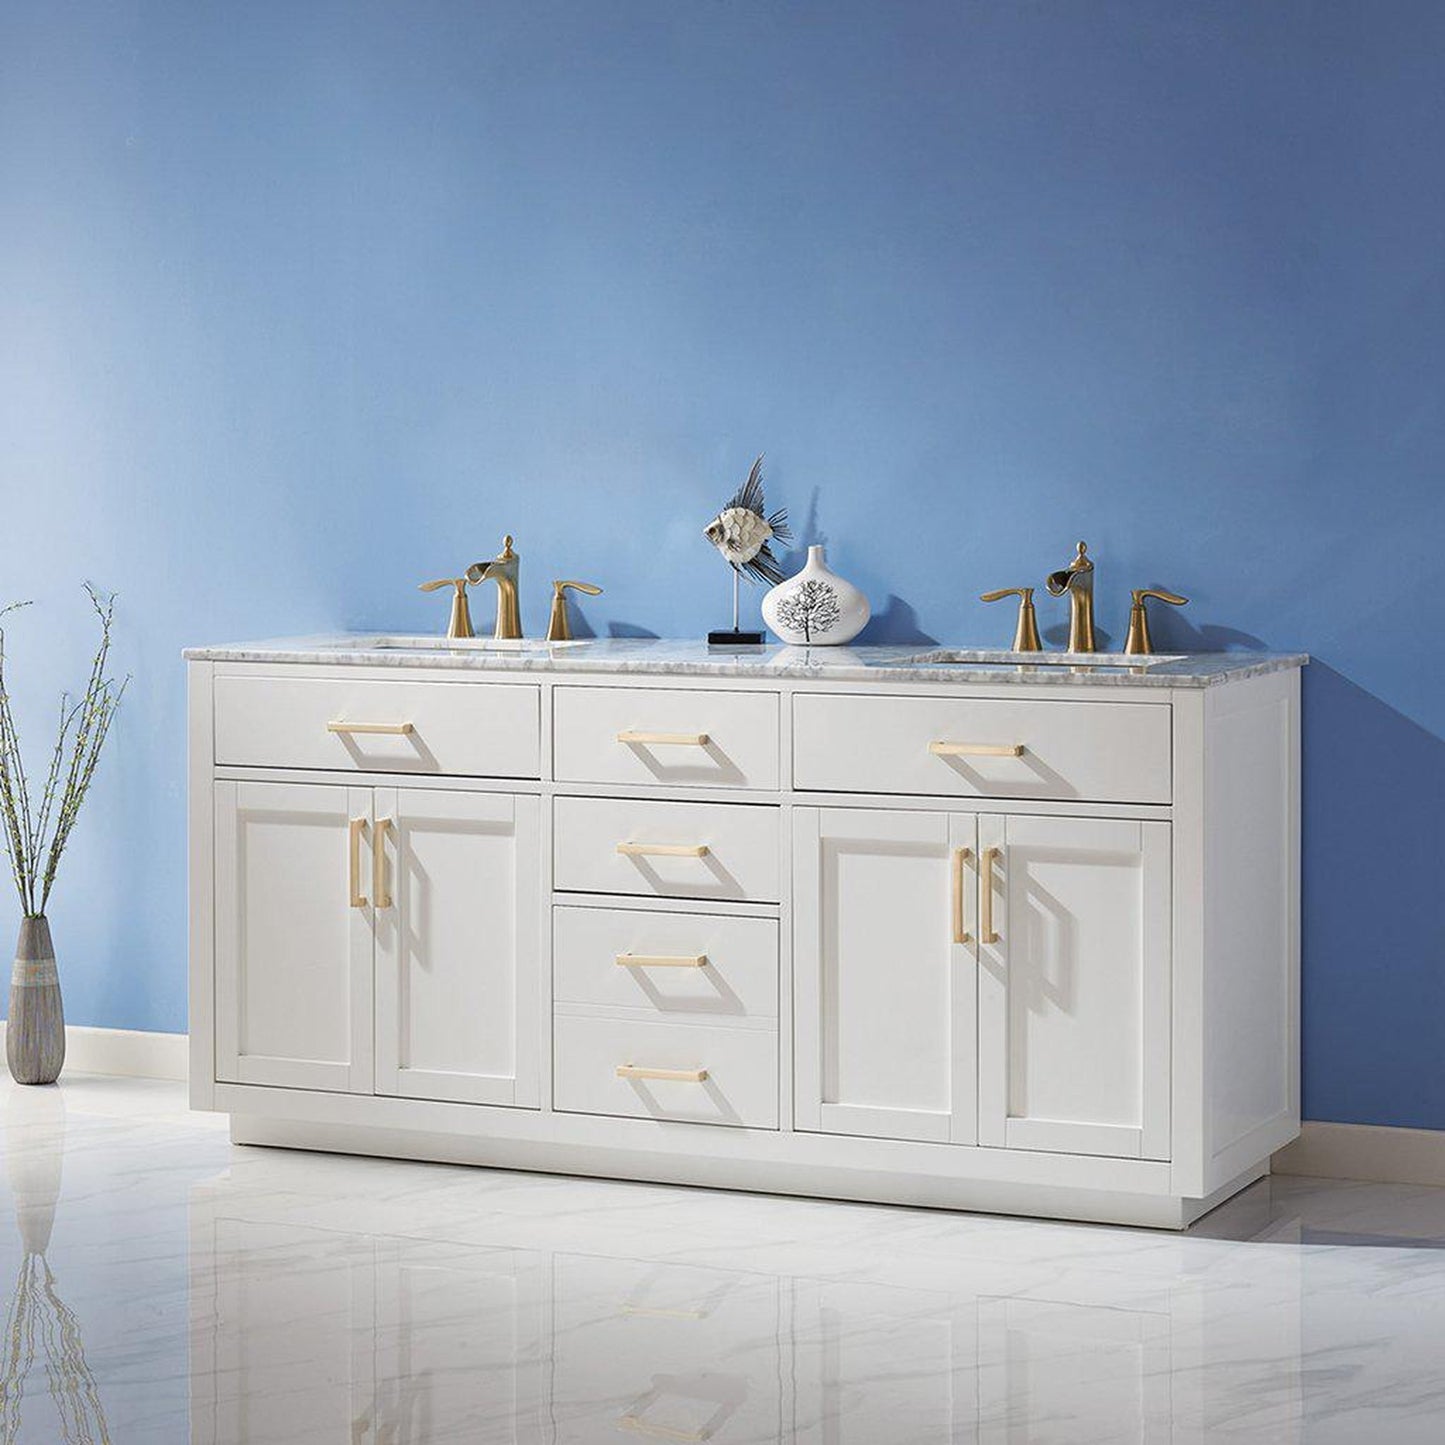 Altair Ivy 72" Double White Freestanding Bathroom Vanity Set With Natural Carrara White Marble Top, Two Rectangular Undermount Ceramic Sinks, and Overflow